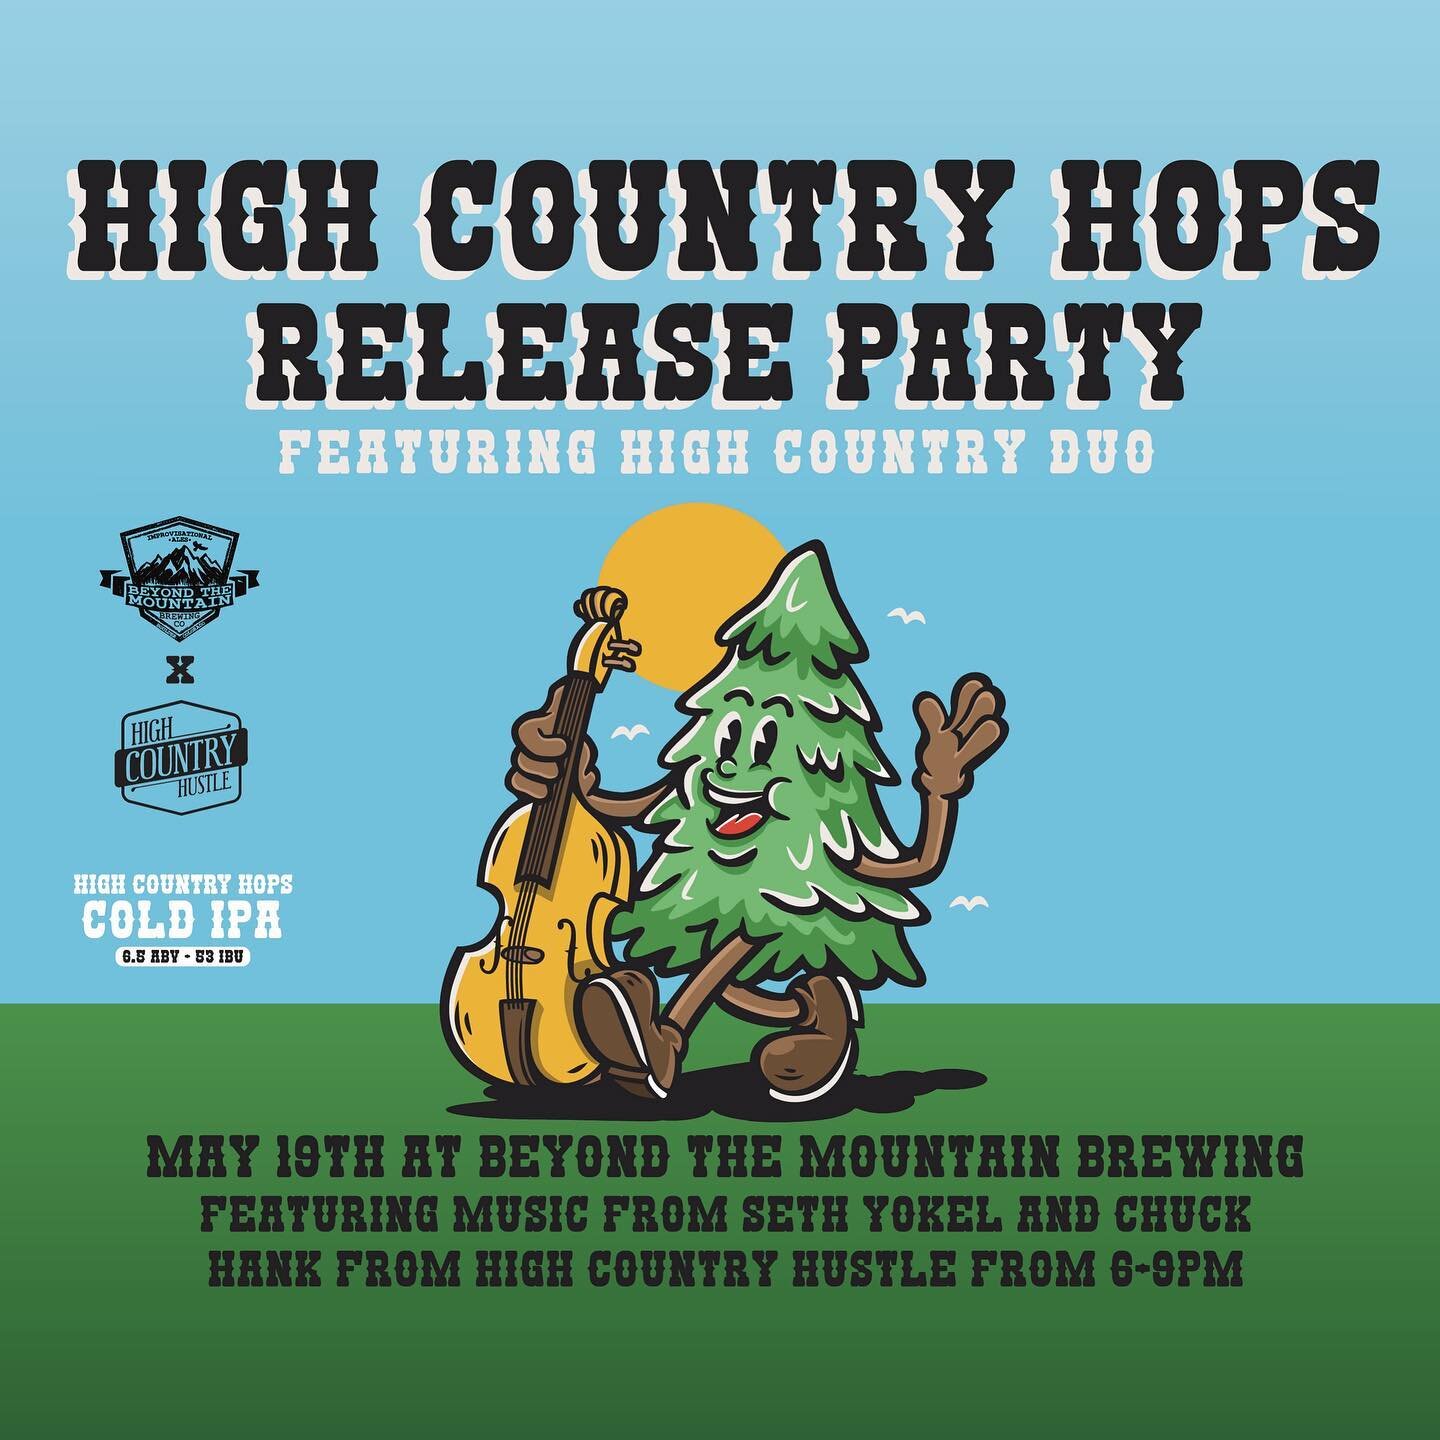 Our new beer &ldquo;High Country Hops&rdquo; with @beyondthemountainbrewing will be released on May 19! Charlie and Seth will be playing a High Country Duo Set in Celebration! Stop by for some crispy beers and fun tunes!